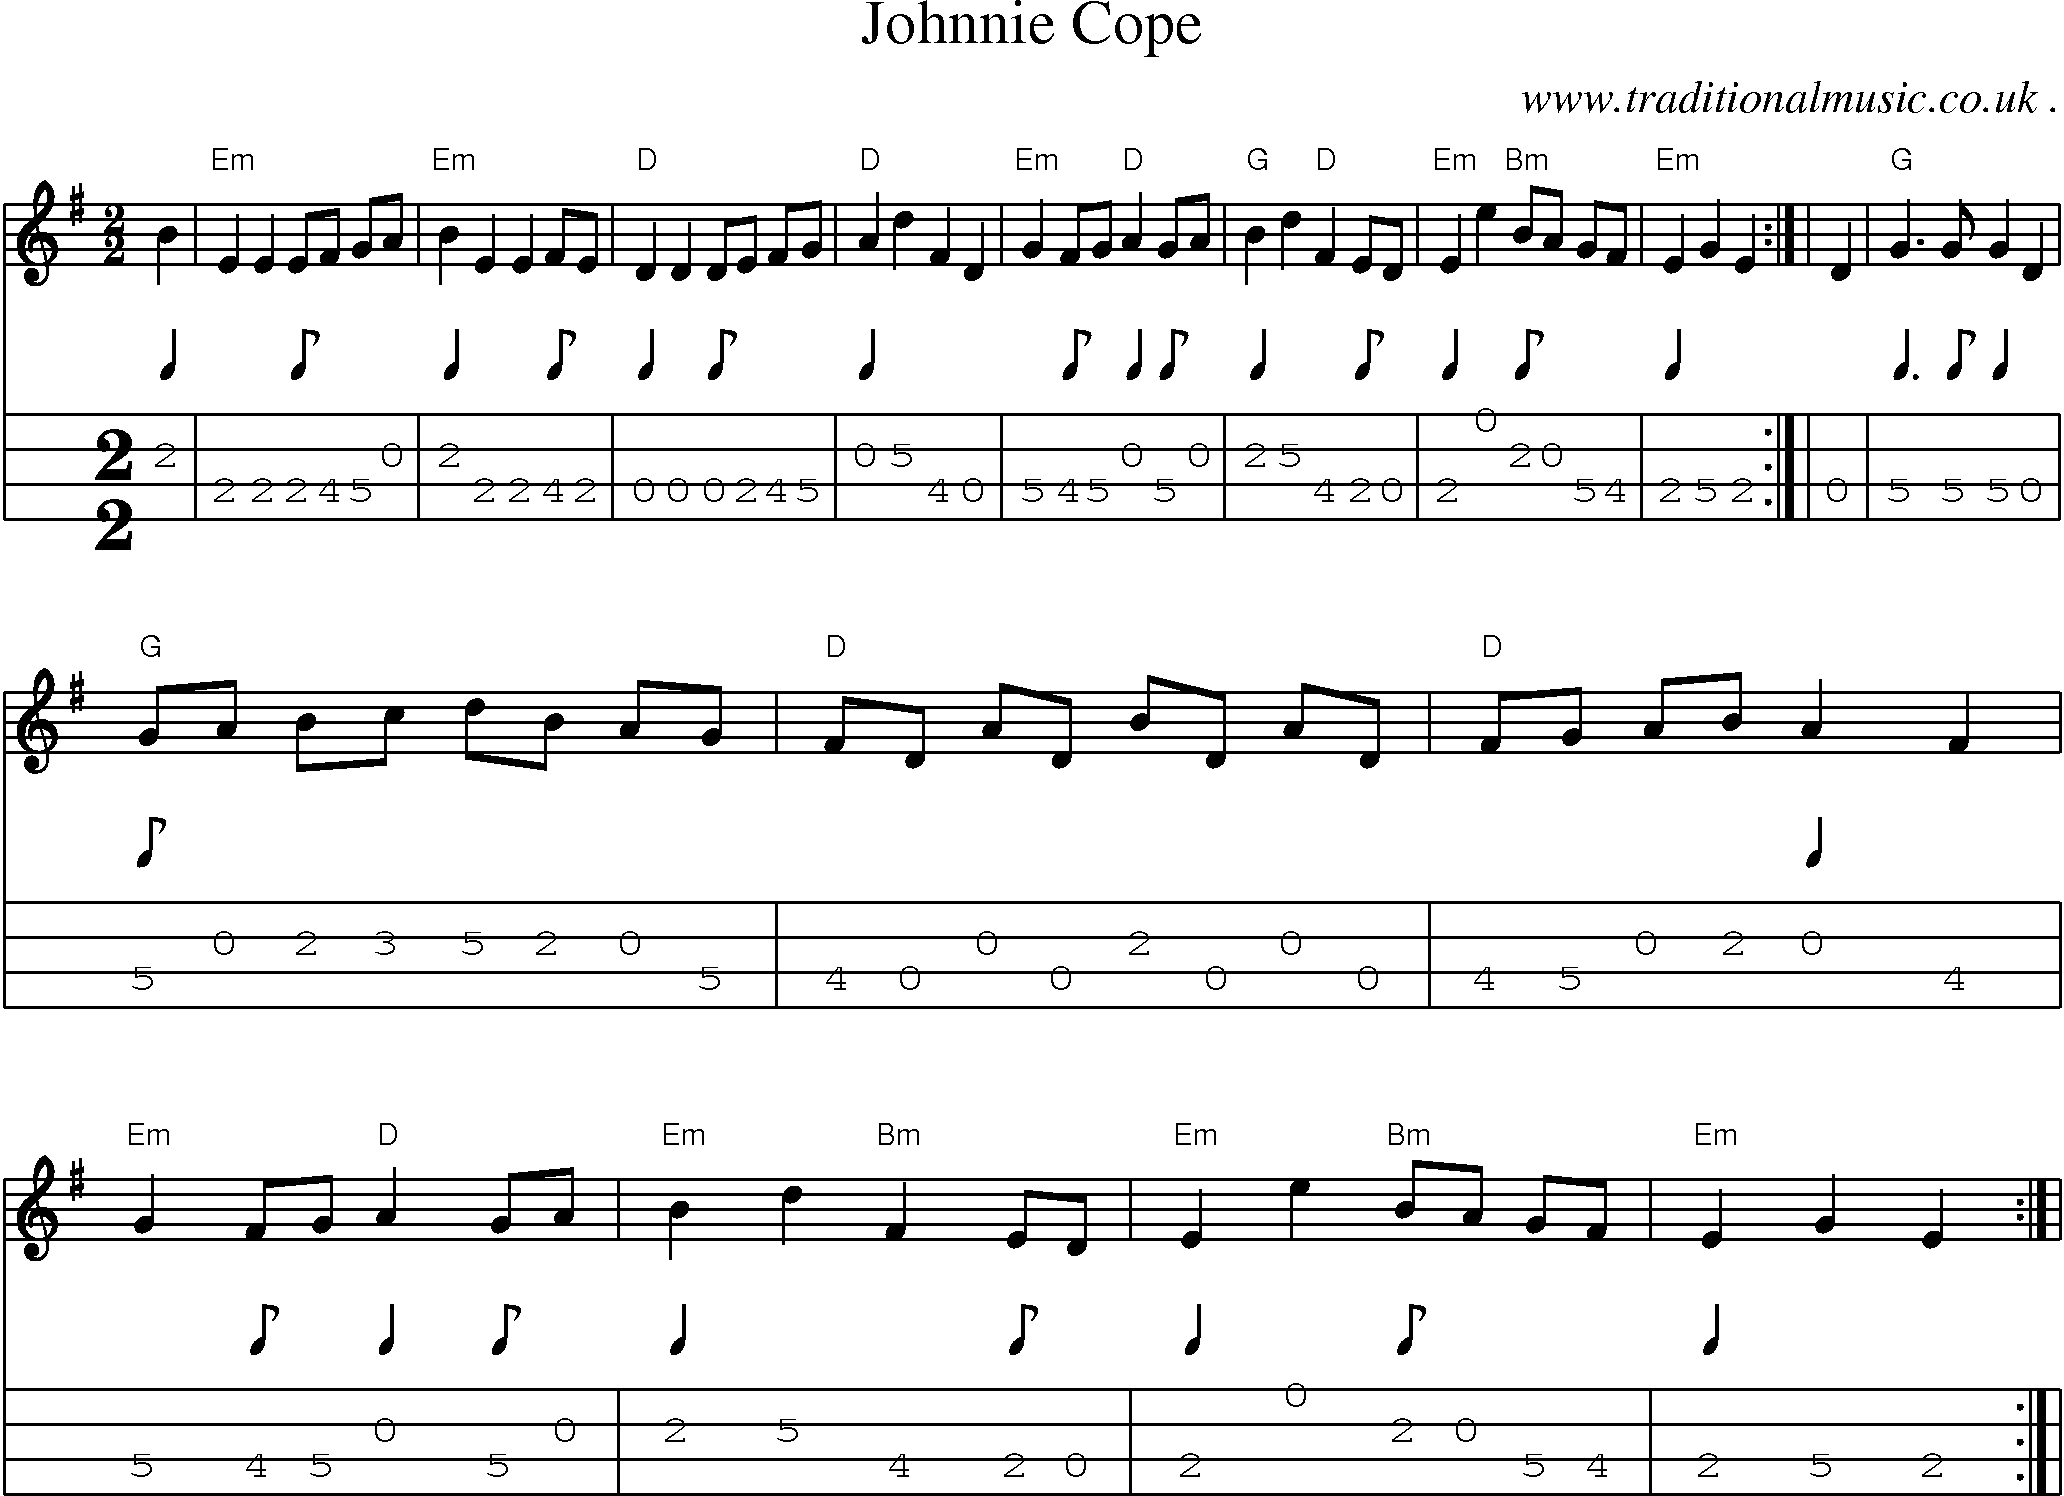 Sheet-music  score, Chords and Mandolin Tabs for Johnnie Cope